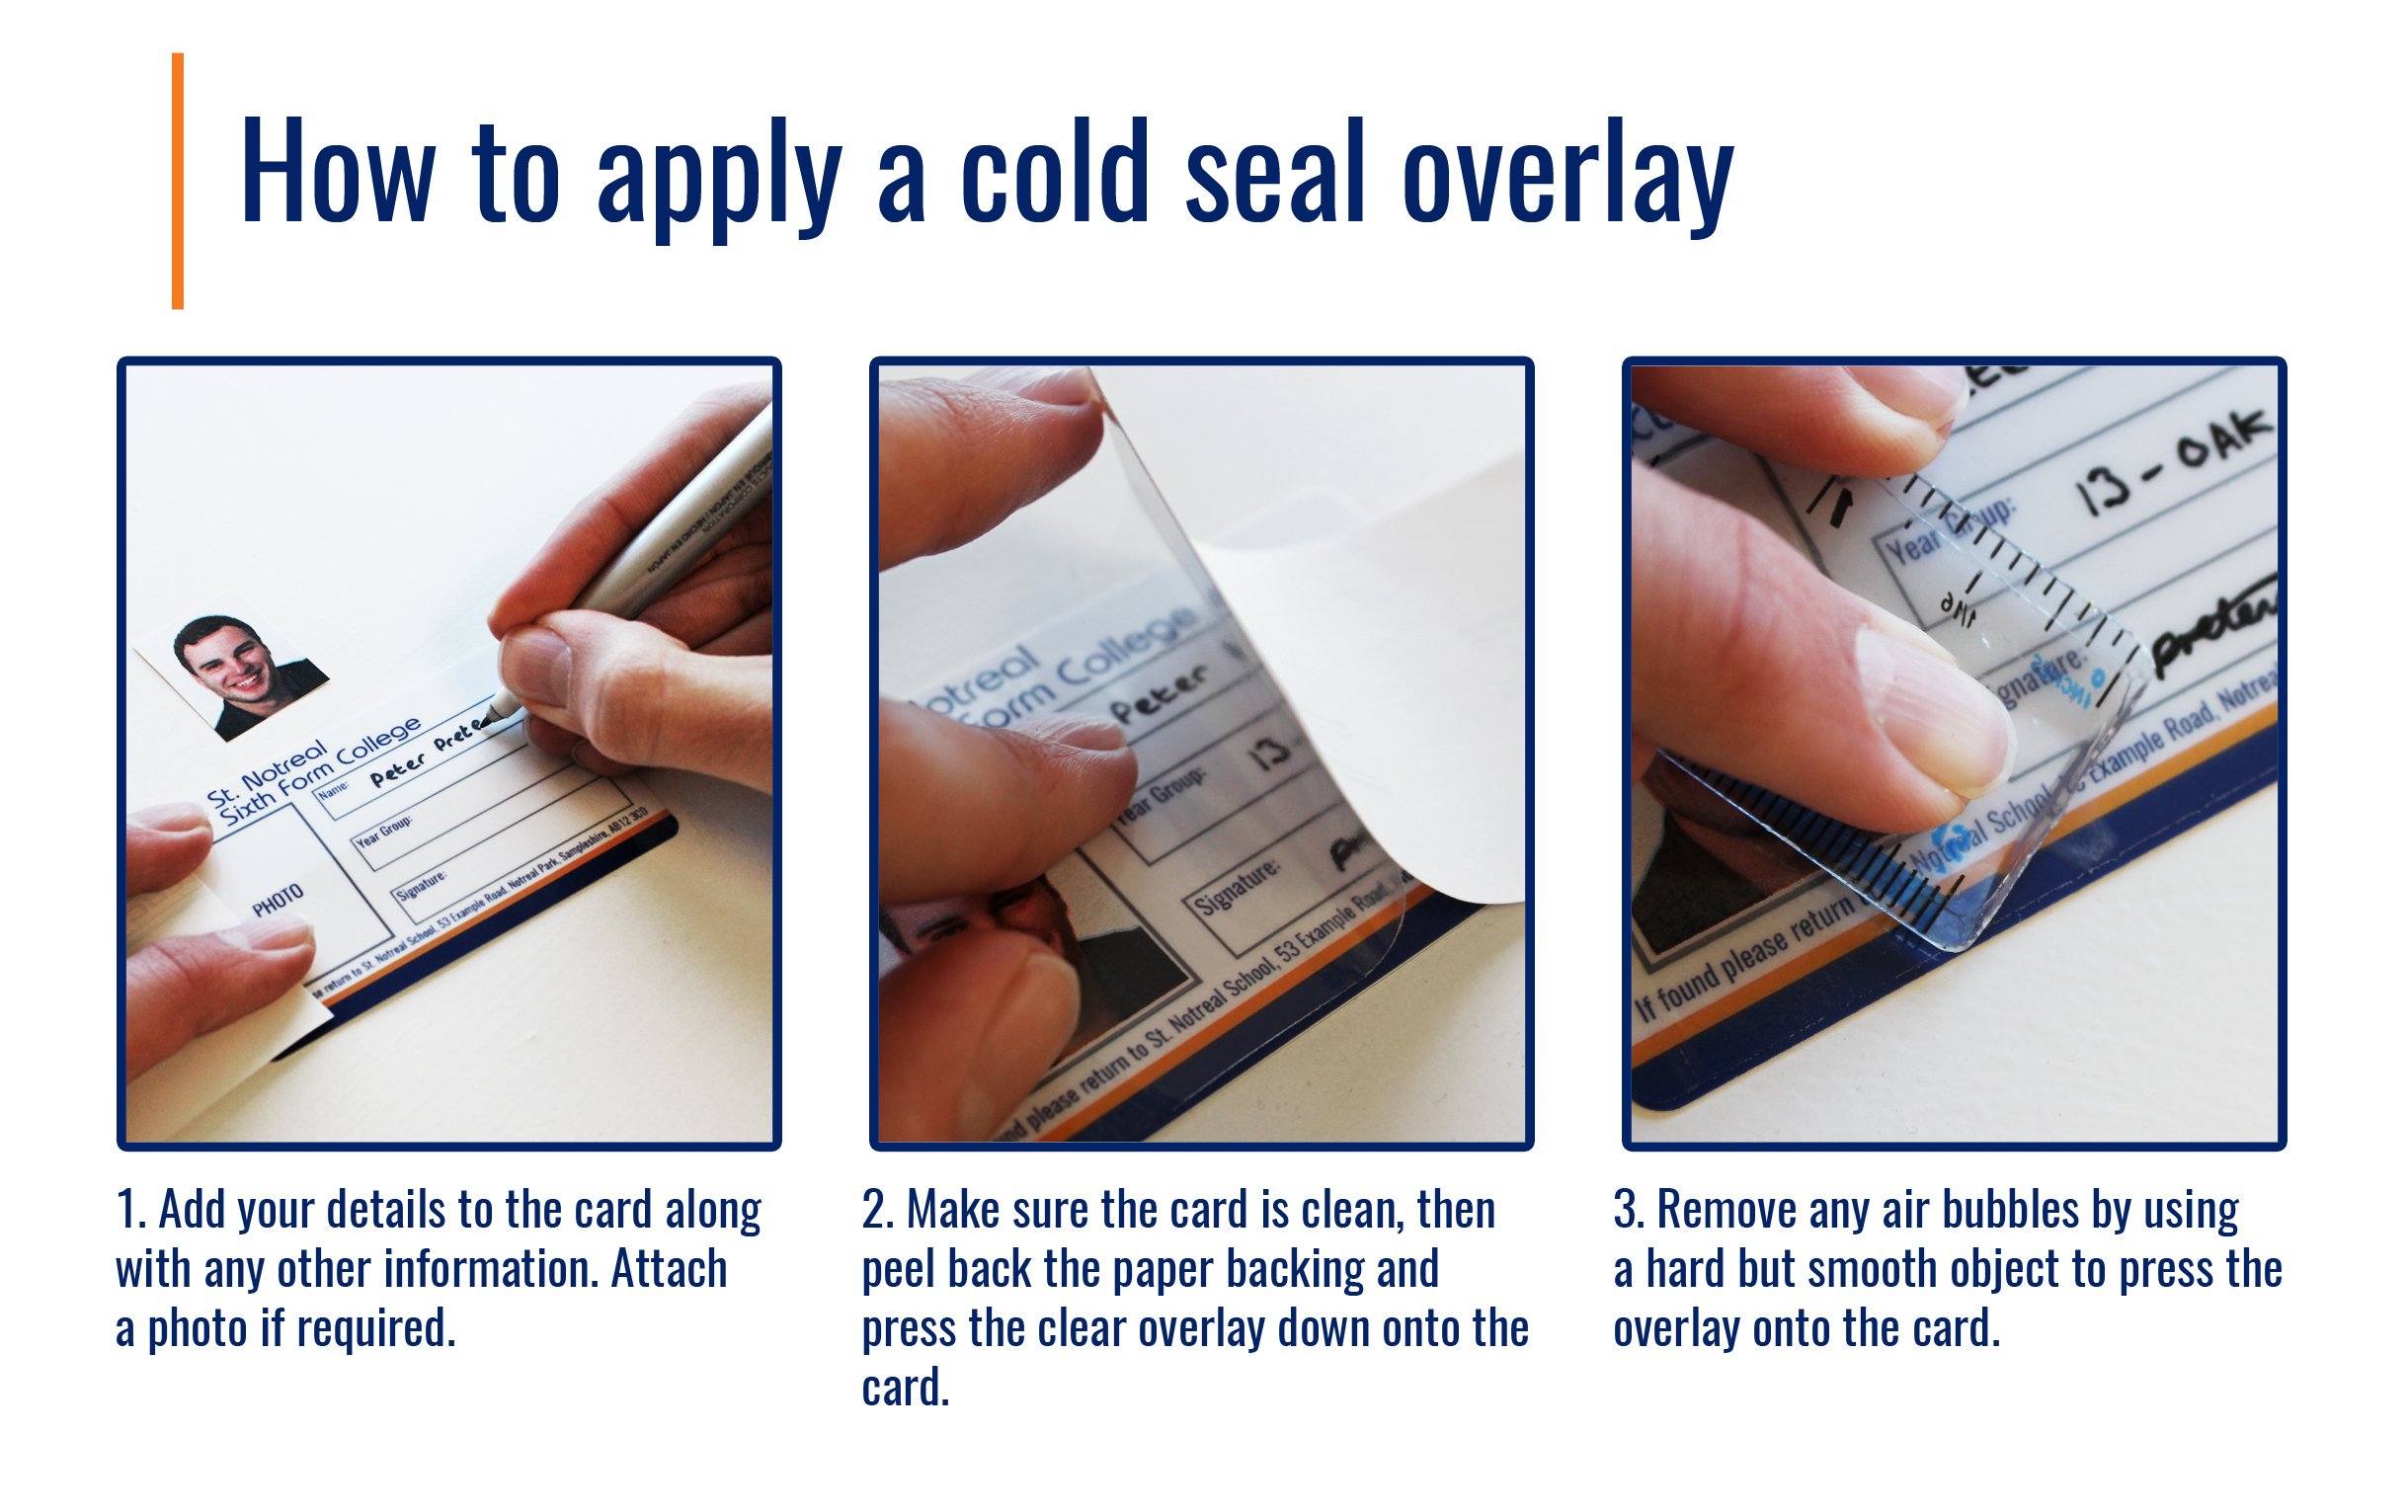 How to apply a cold seal overlay